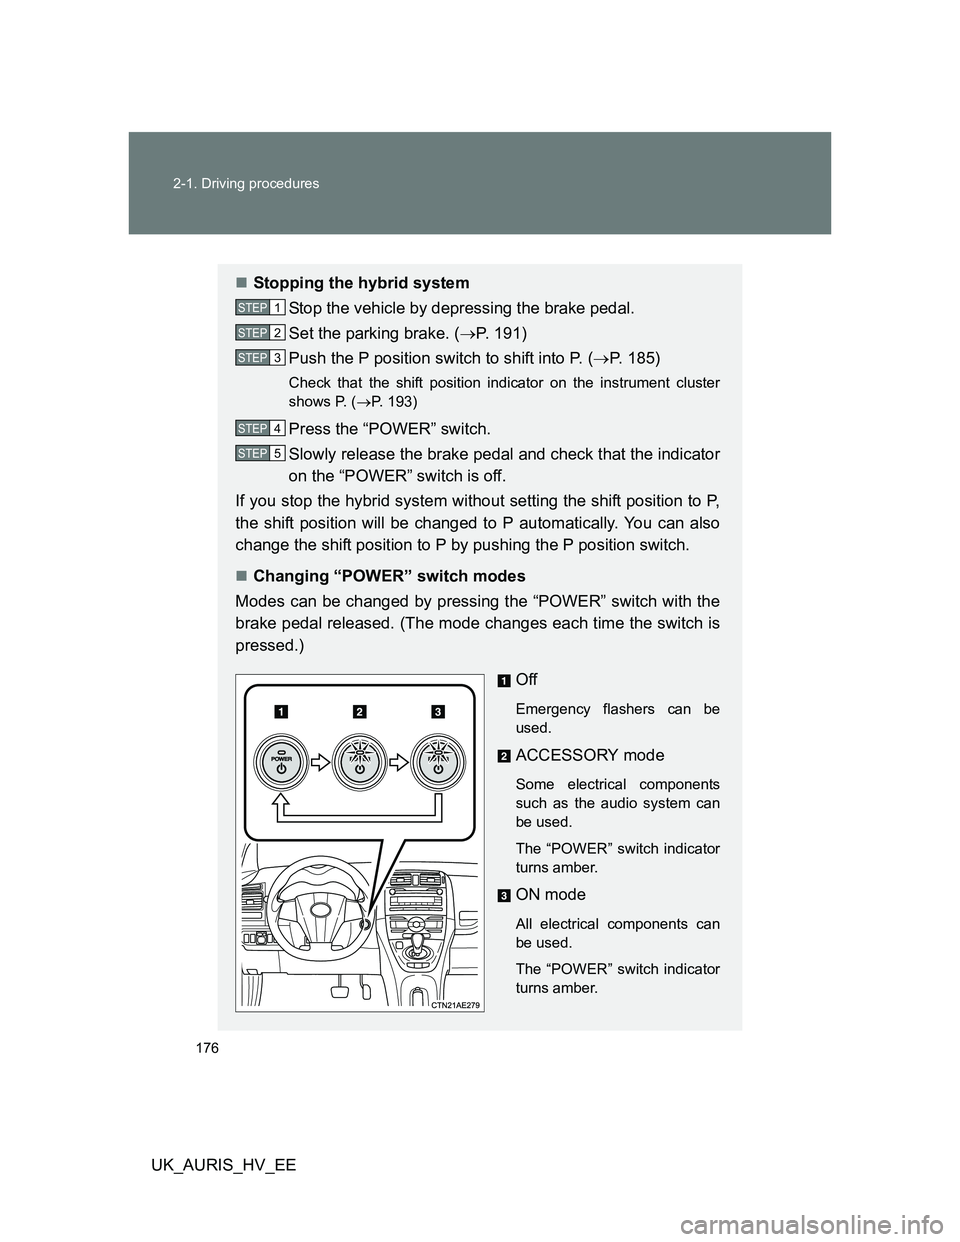 TOYOTA AURIS HYBRID 2012  Owners Manual 176 2-1. Driving procedures
UK_AURIS_HV_EE
Stopping the hybrid system
Stop the vehicle by depressing the brake pedal.
Set the parking brake. (P. 191)
Push the P position switch to shift into P. 